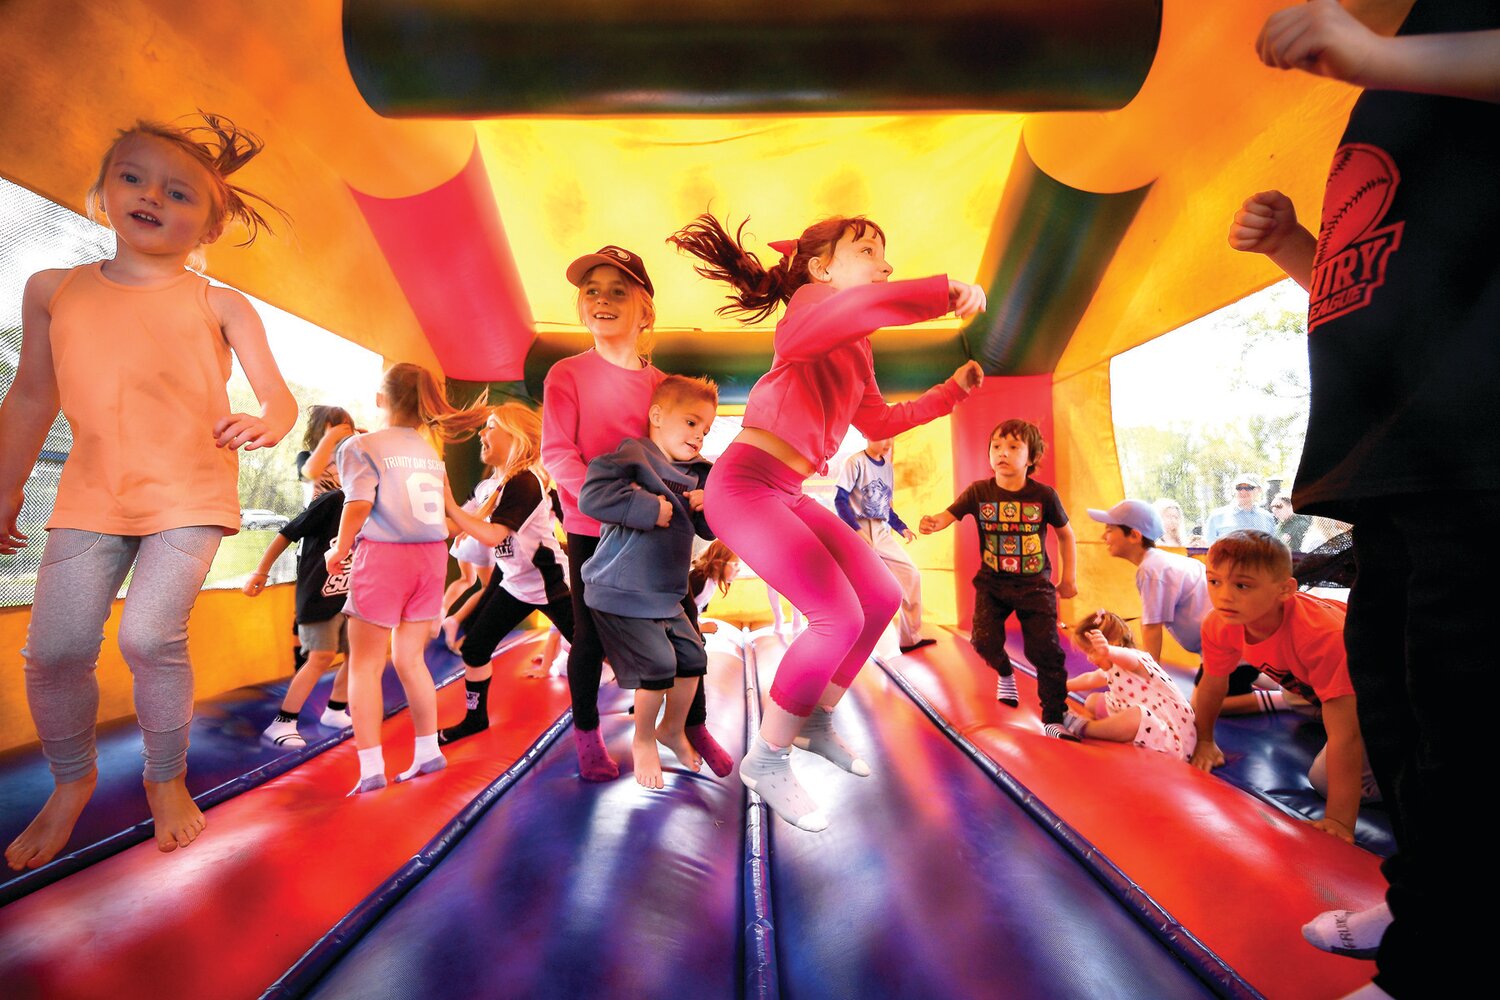 Children play inside the bounce house.